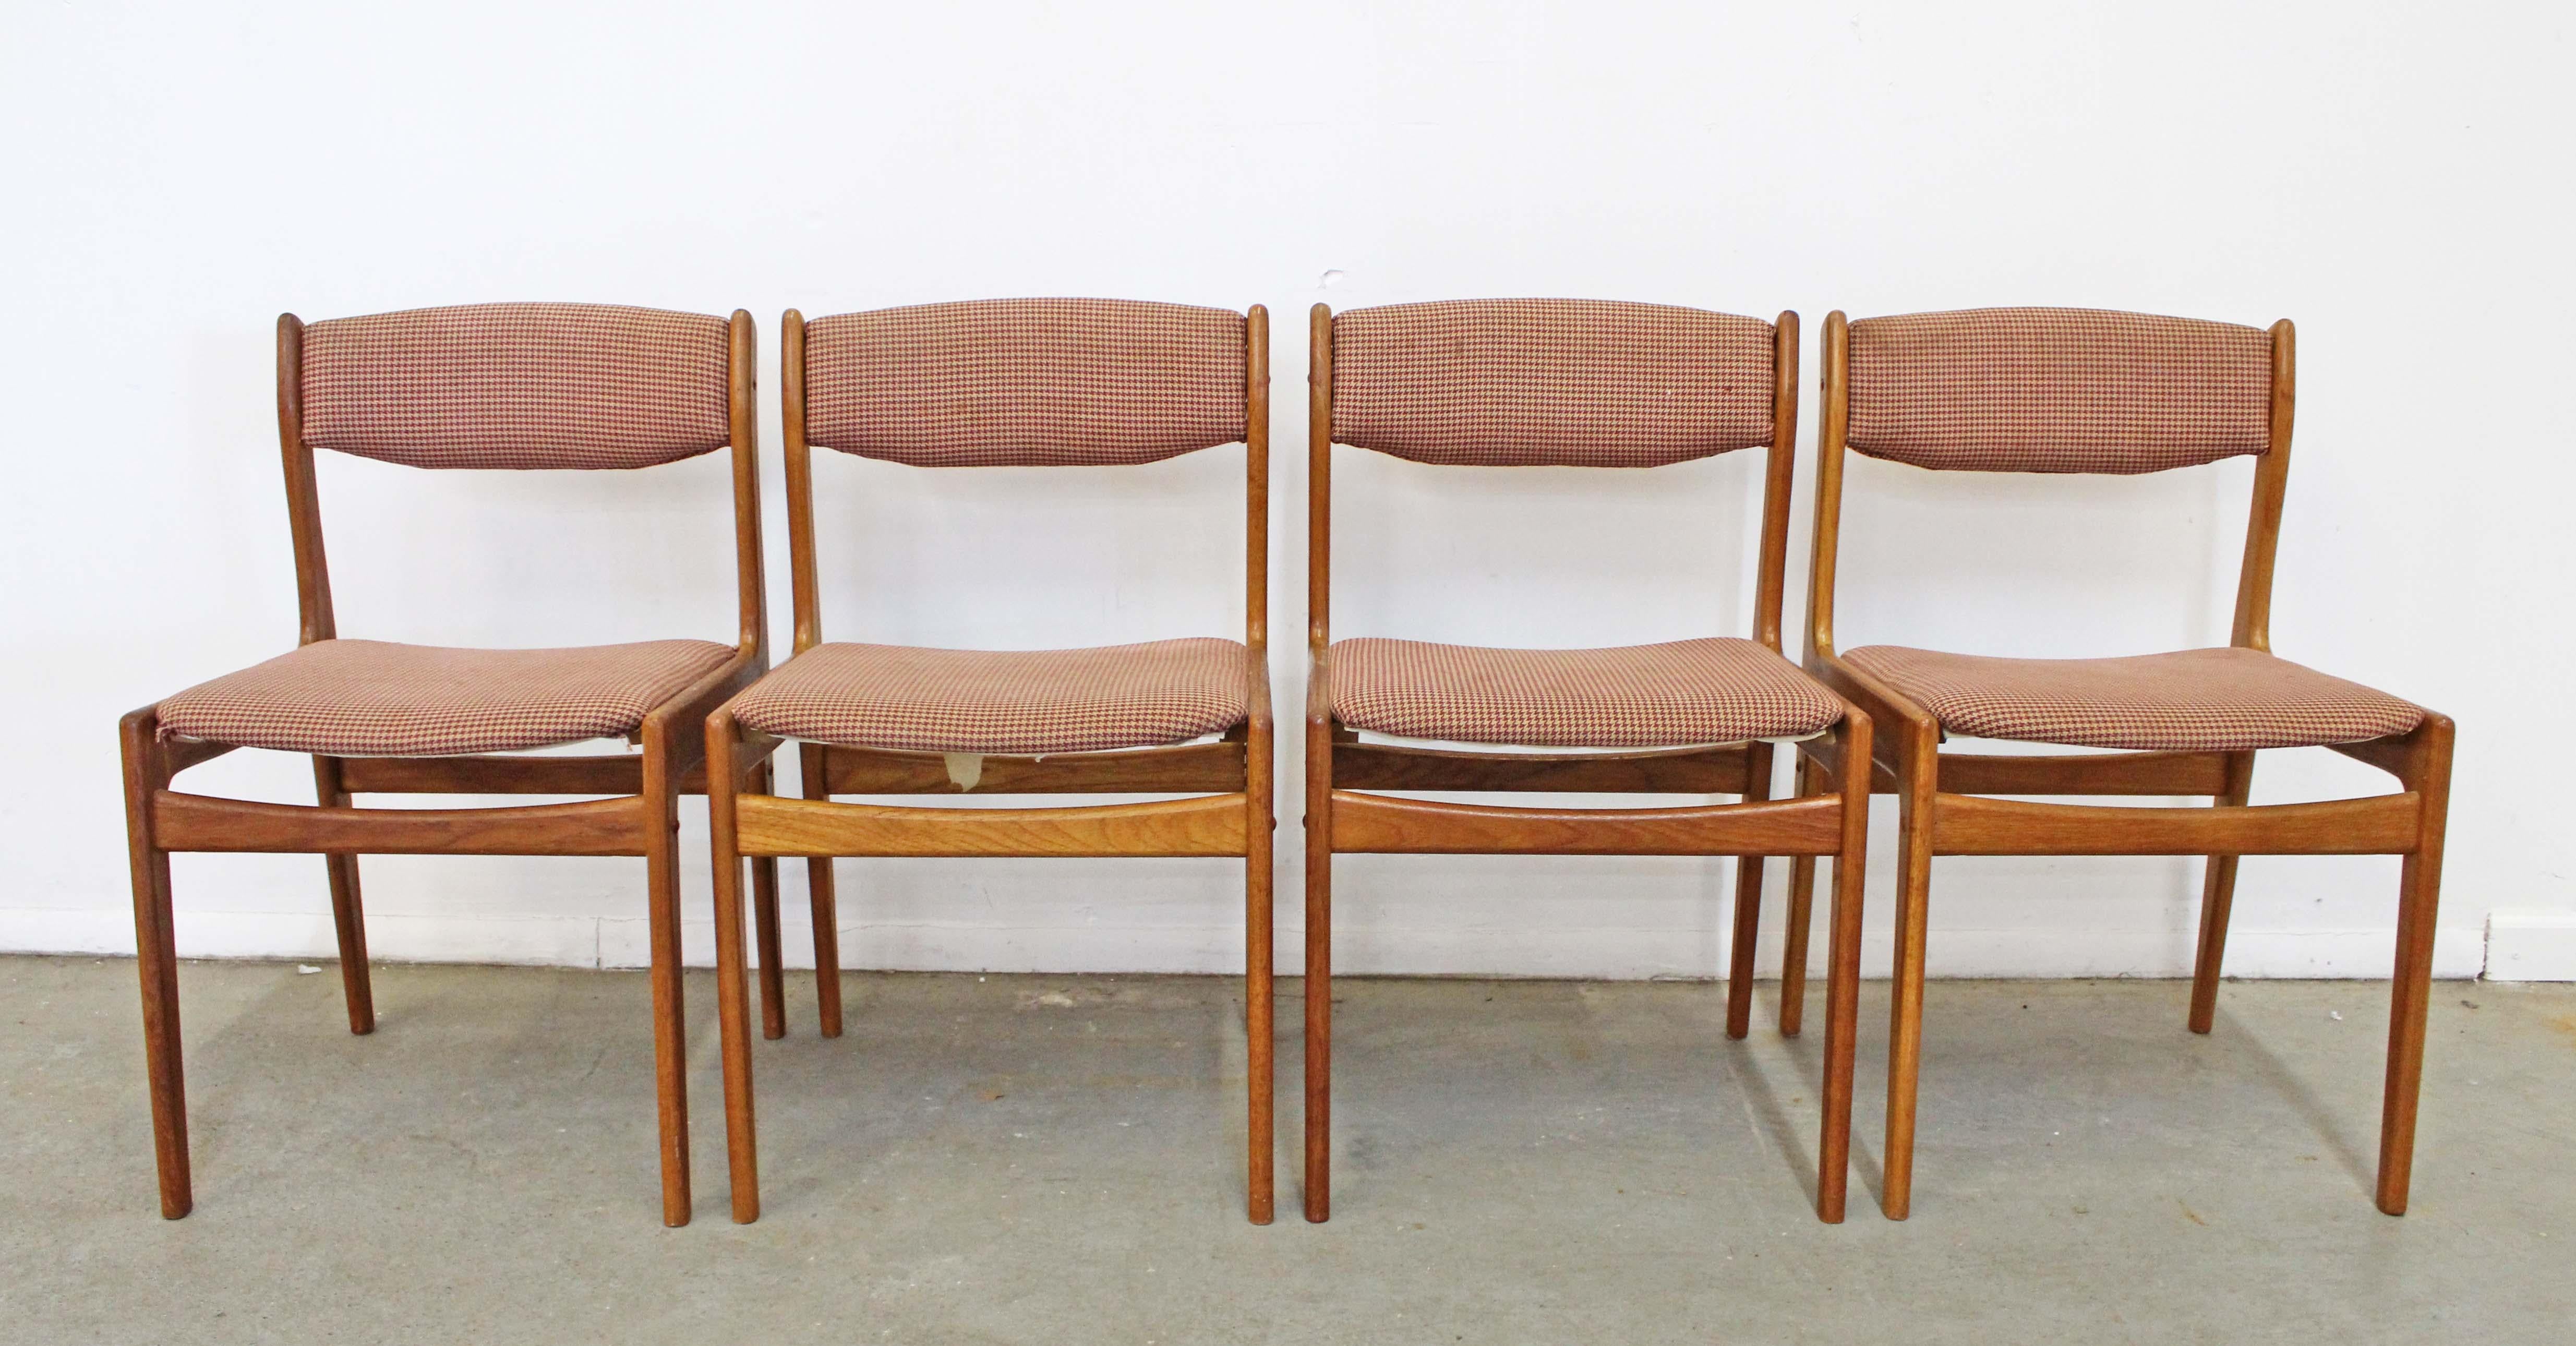 What a find. Offered is a set of 4 midcentury teak dining chairs. They are in decent condition, but show obvious age wear (tears/stains in upholstery, surface scratches/wear-- see photos). They would make for a good re-upholstery project. They are